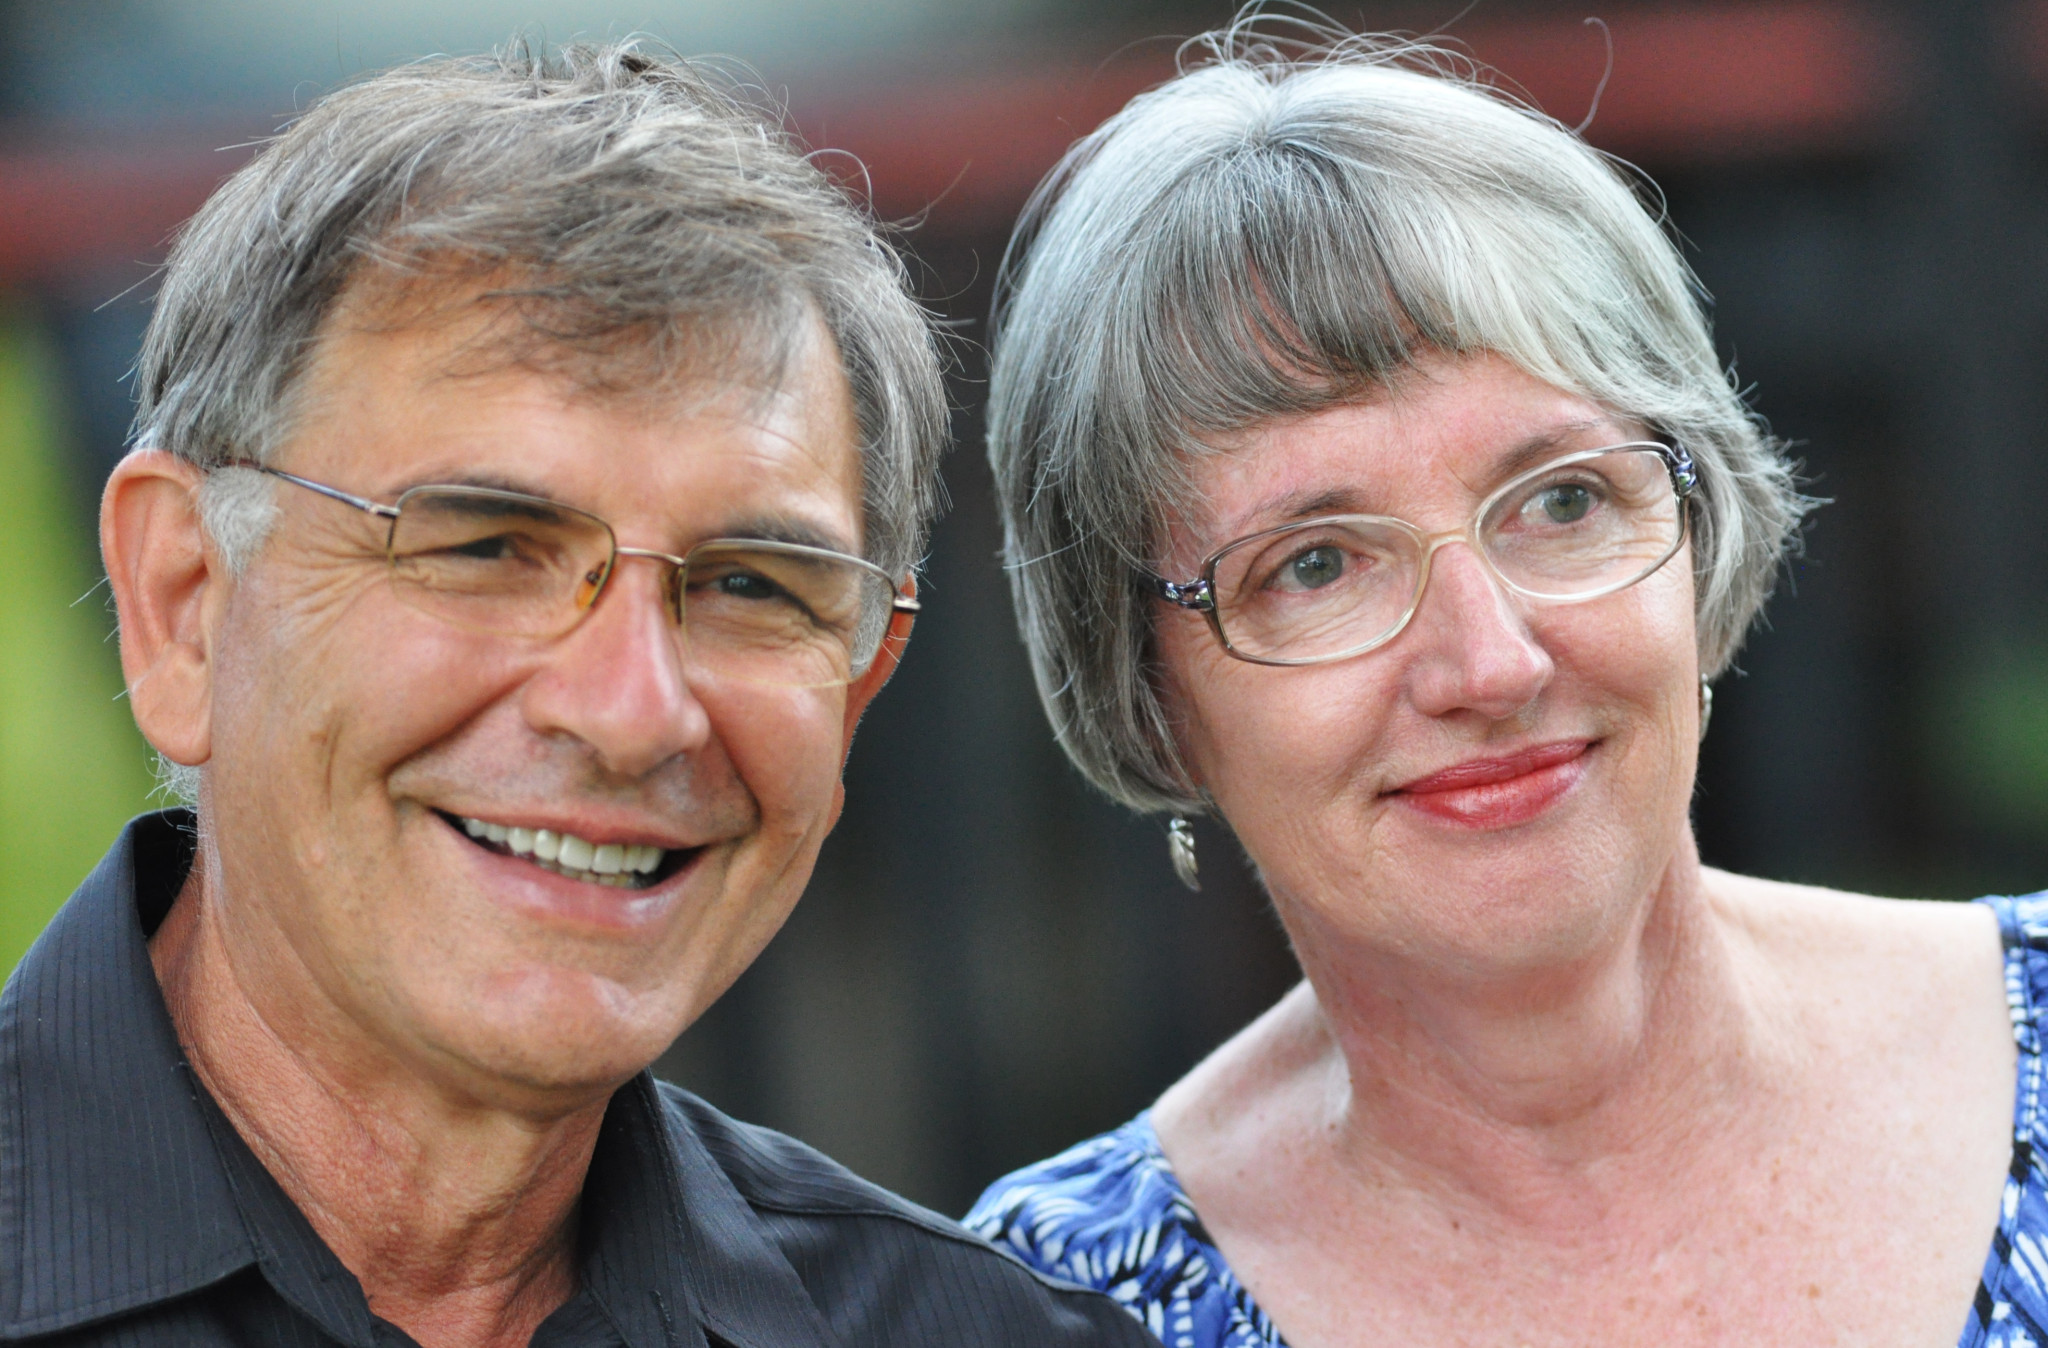 Joe and Wendy Paronella are set to perform at the Carols by Candlelight and Night Markets in Atherton on Saturday.